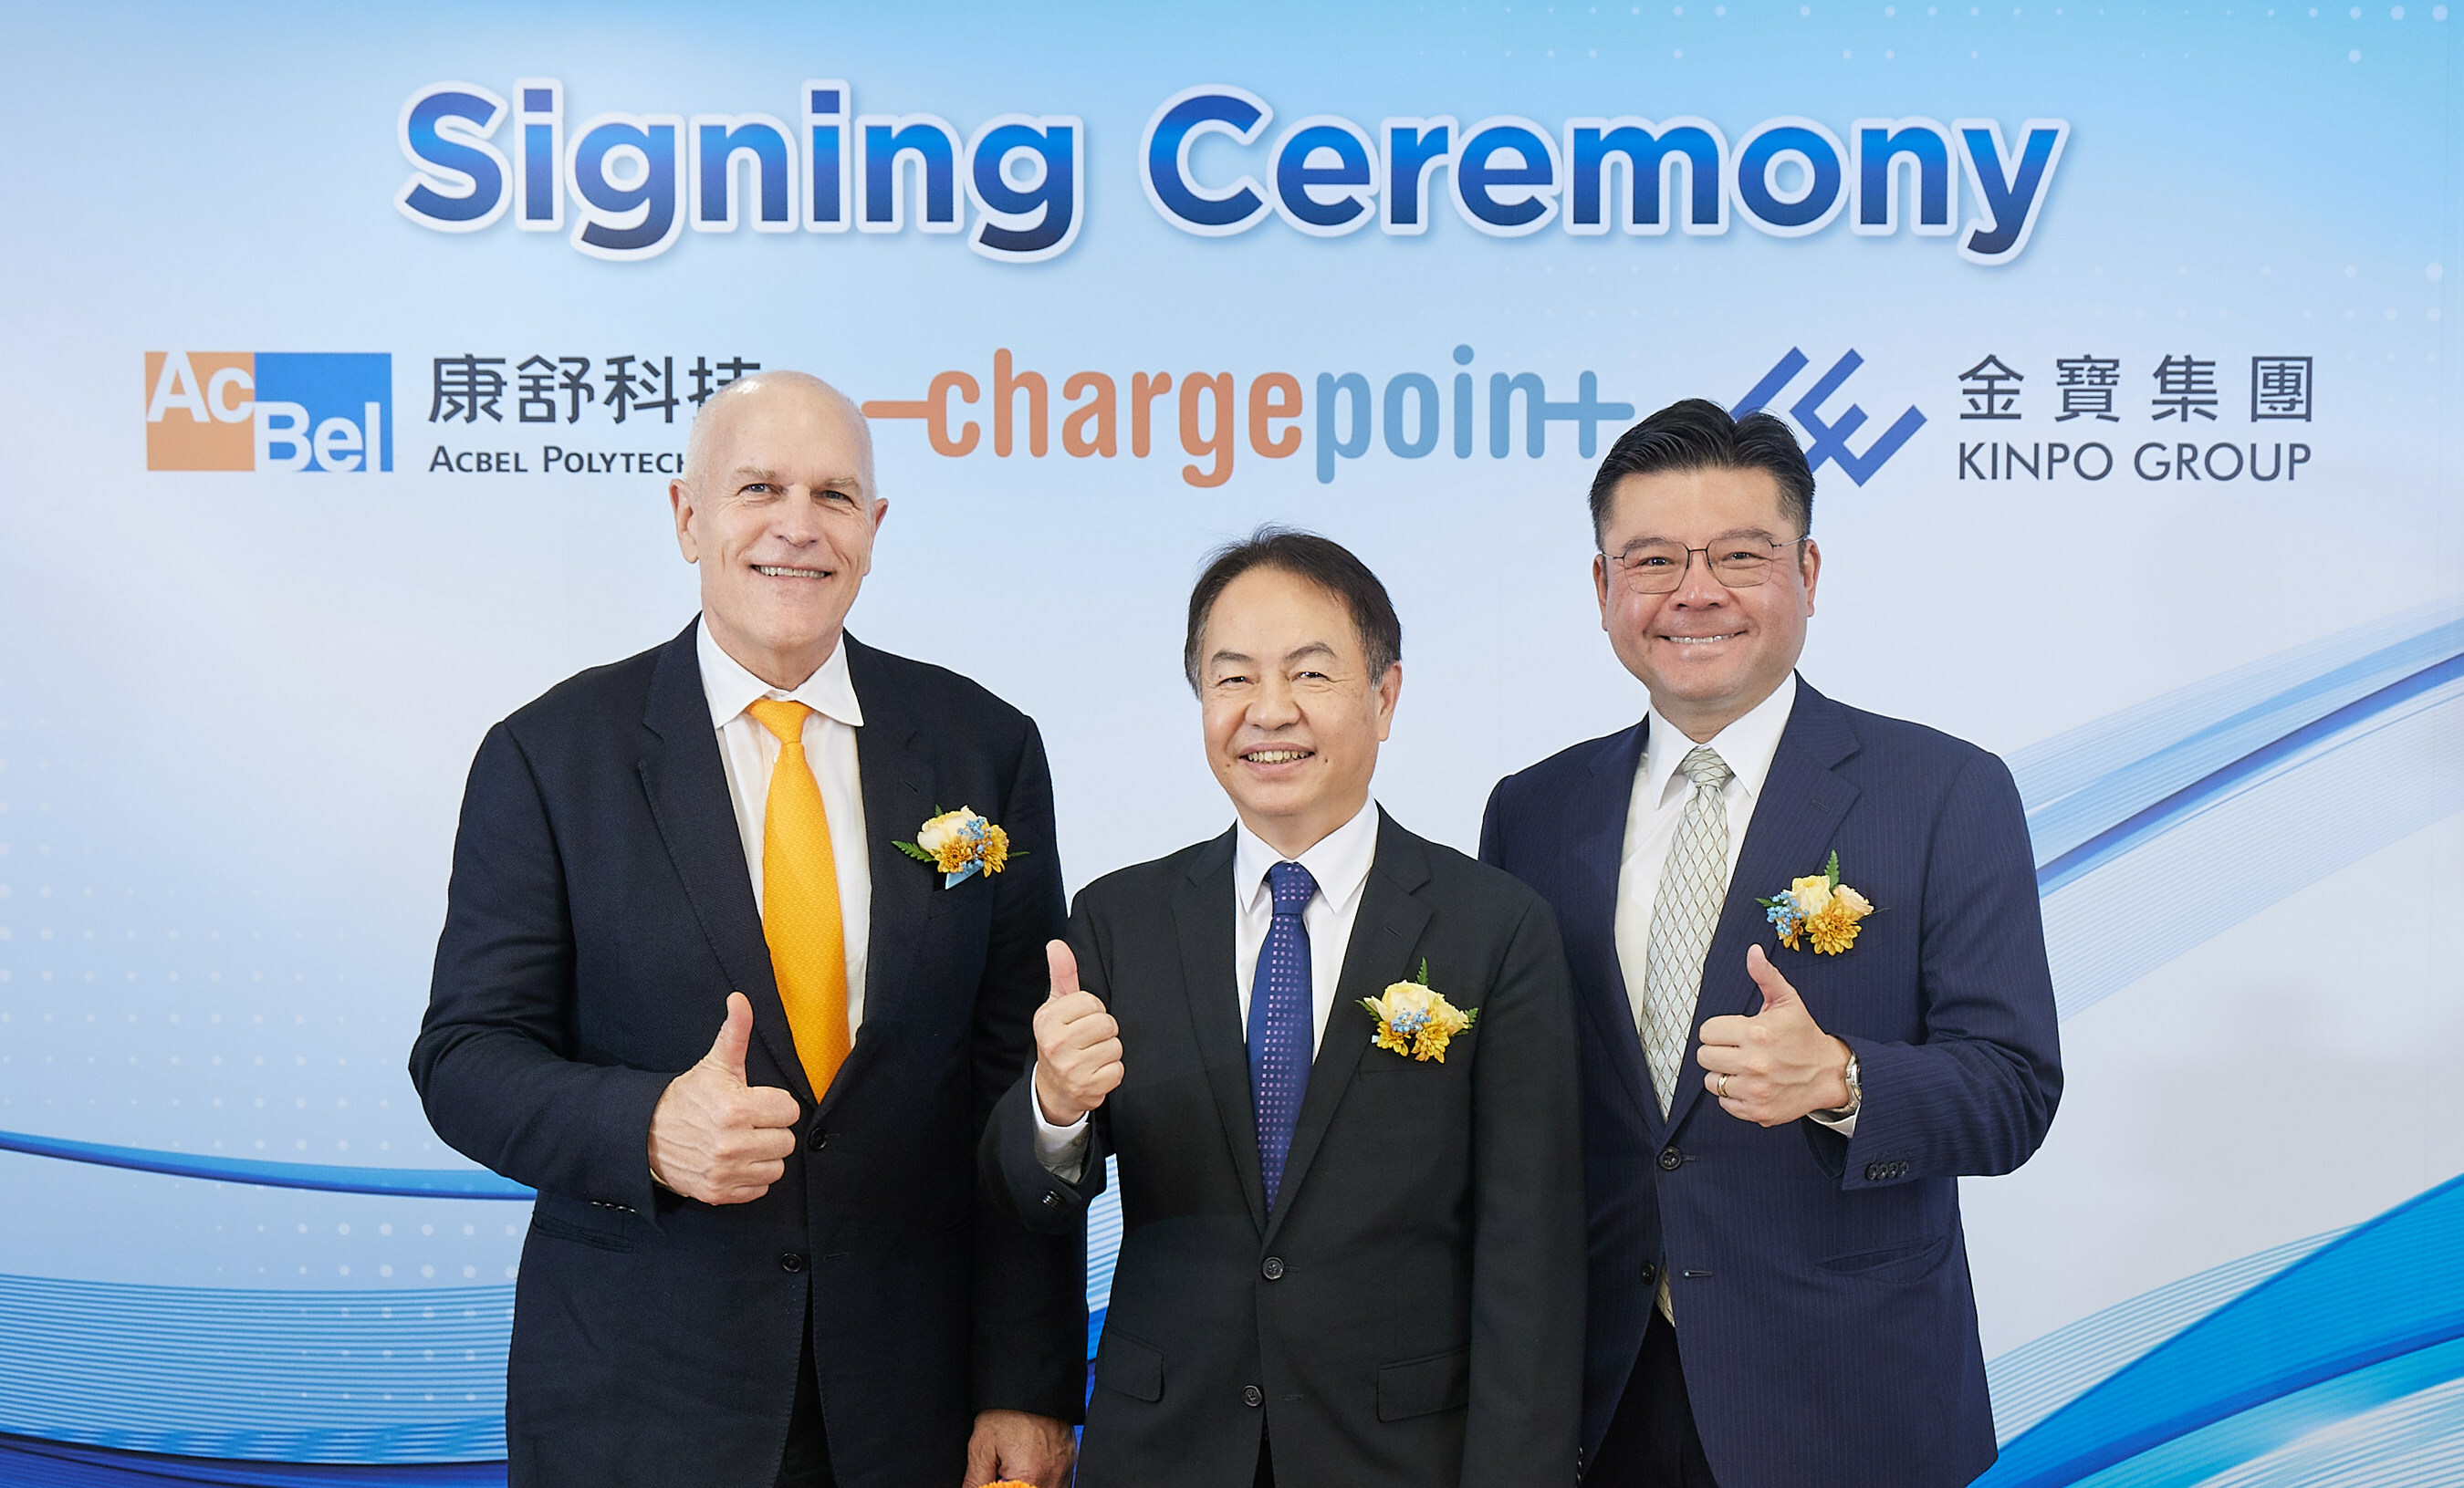 Announcing the collaboration to develop EV charging solutions, from left, Rick Wilmer, CEO of ChargePoint, Andrew Chen, CEO of Kinpo Group, and Jerry Hsu, chairman of AcBel.  Photo: AcBel Polytech